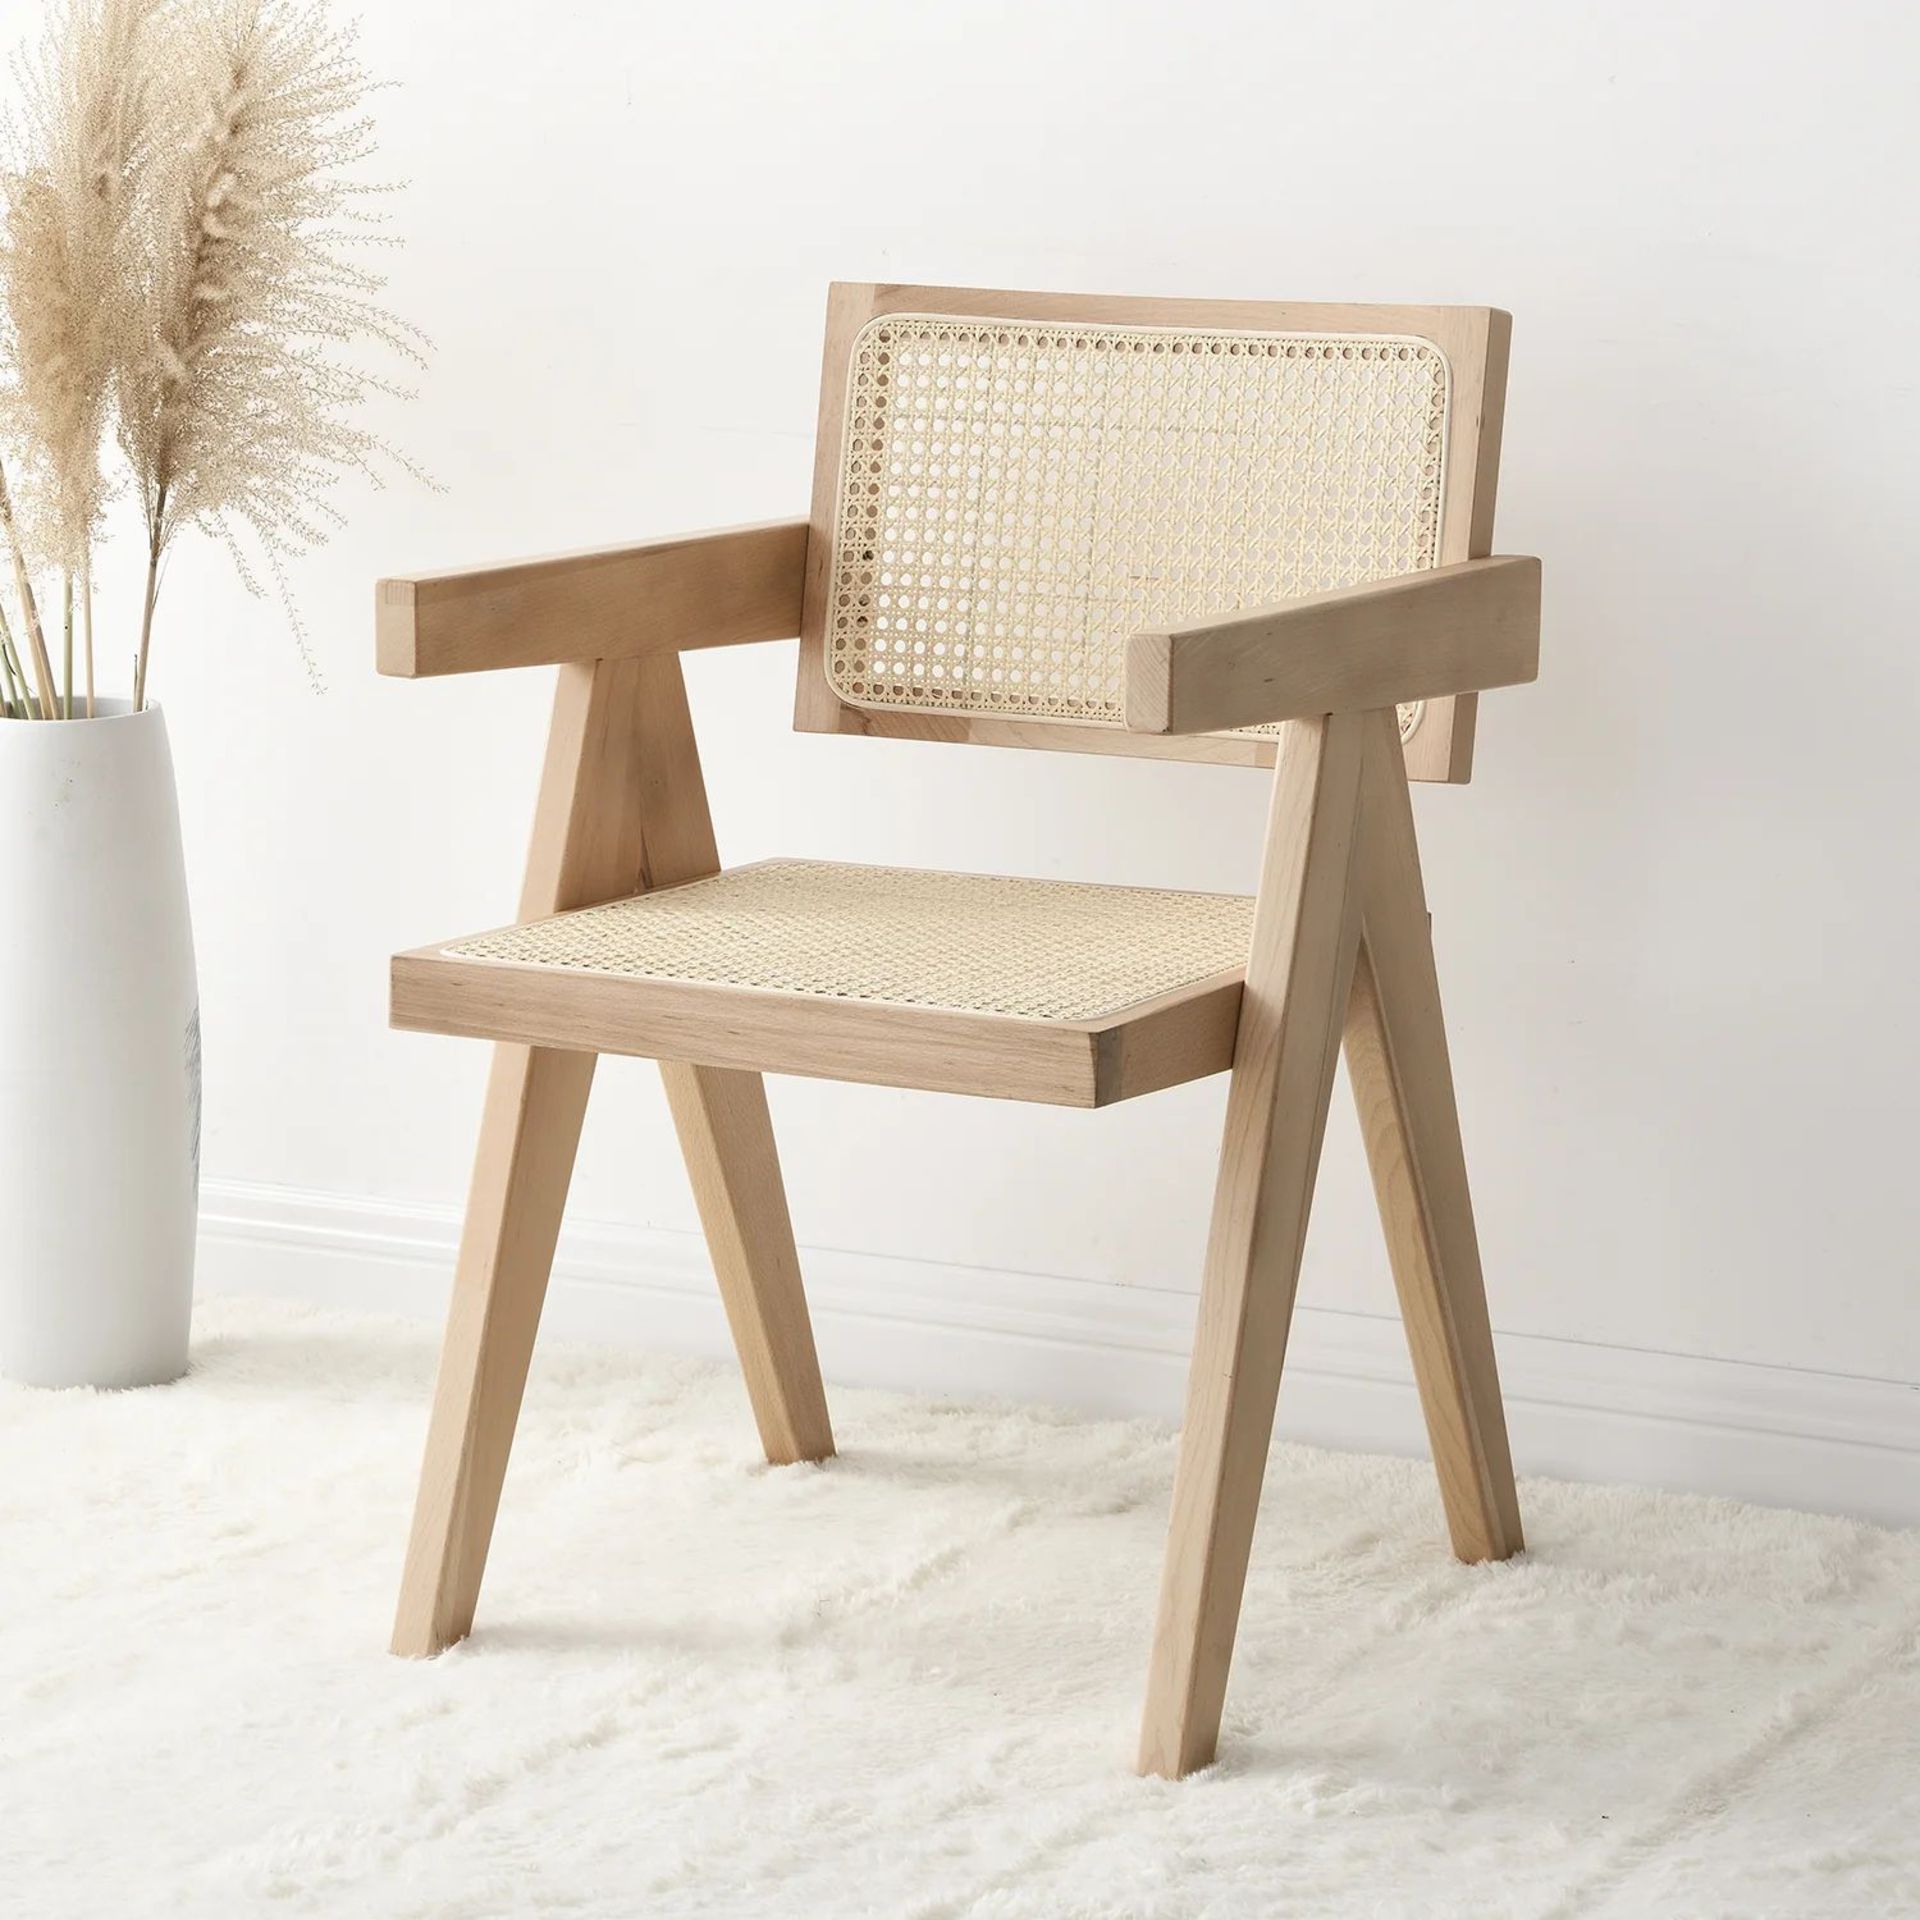 Jeanne Natural Colour Cane Rattan Solid Beech Wood Dining Chair. - R19.1. RRP £209.99. The cane